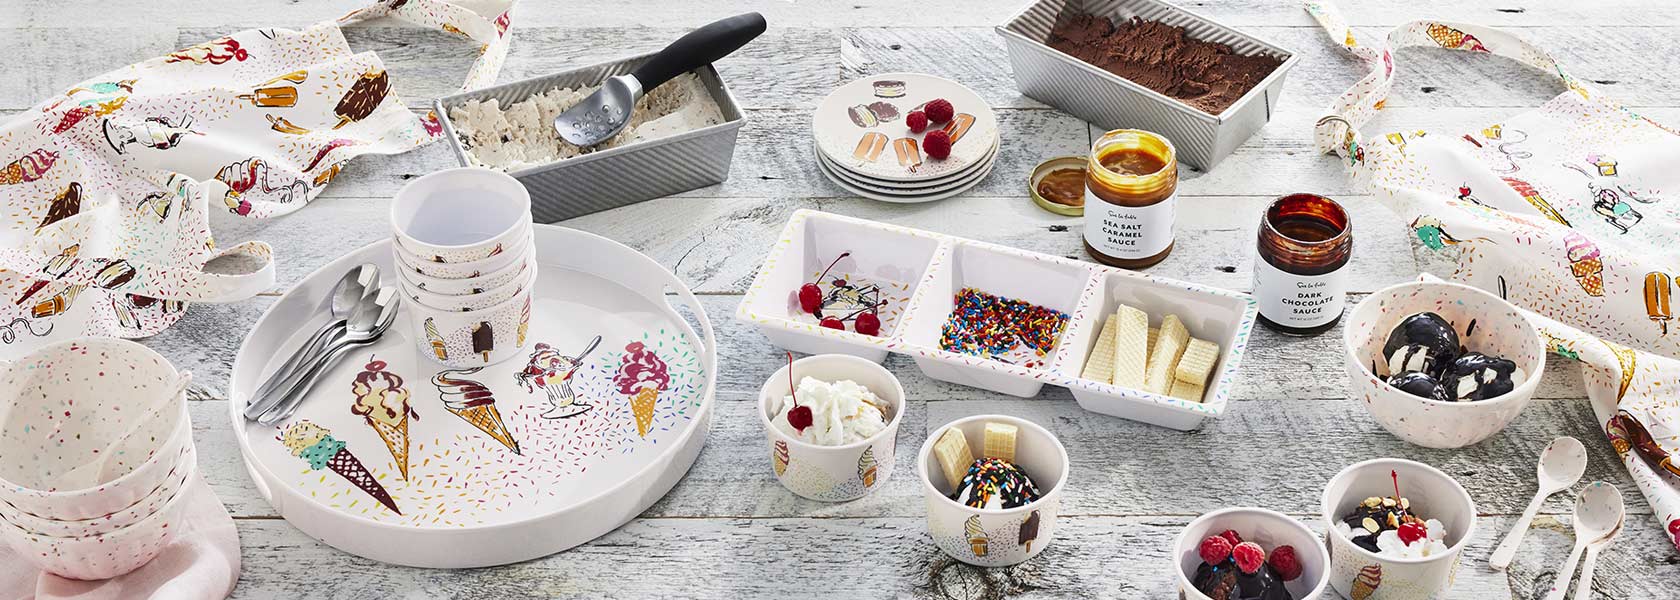 Melamine ice cream themed bowls, plates and serving platters with homemade ice cream